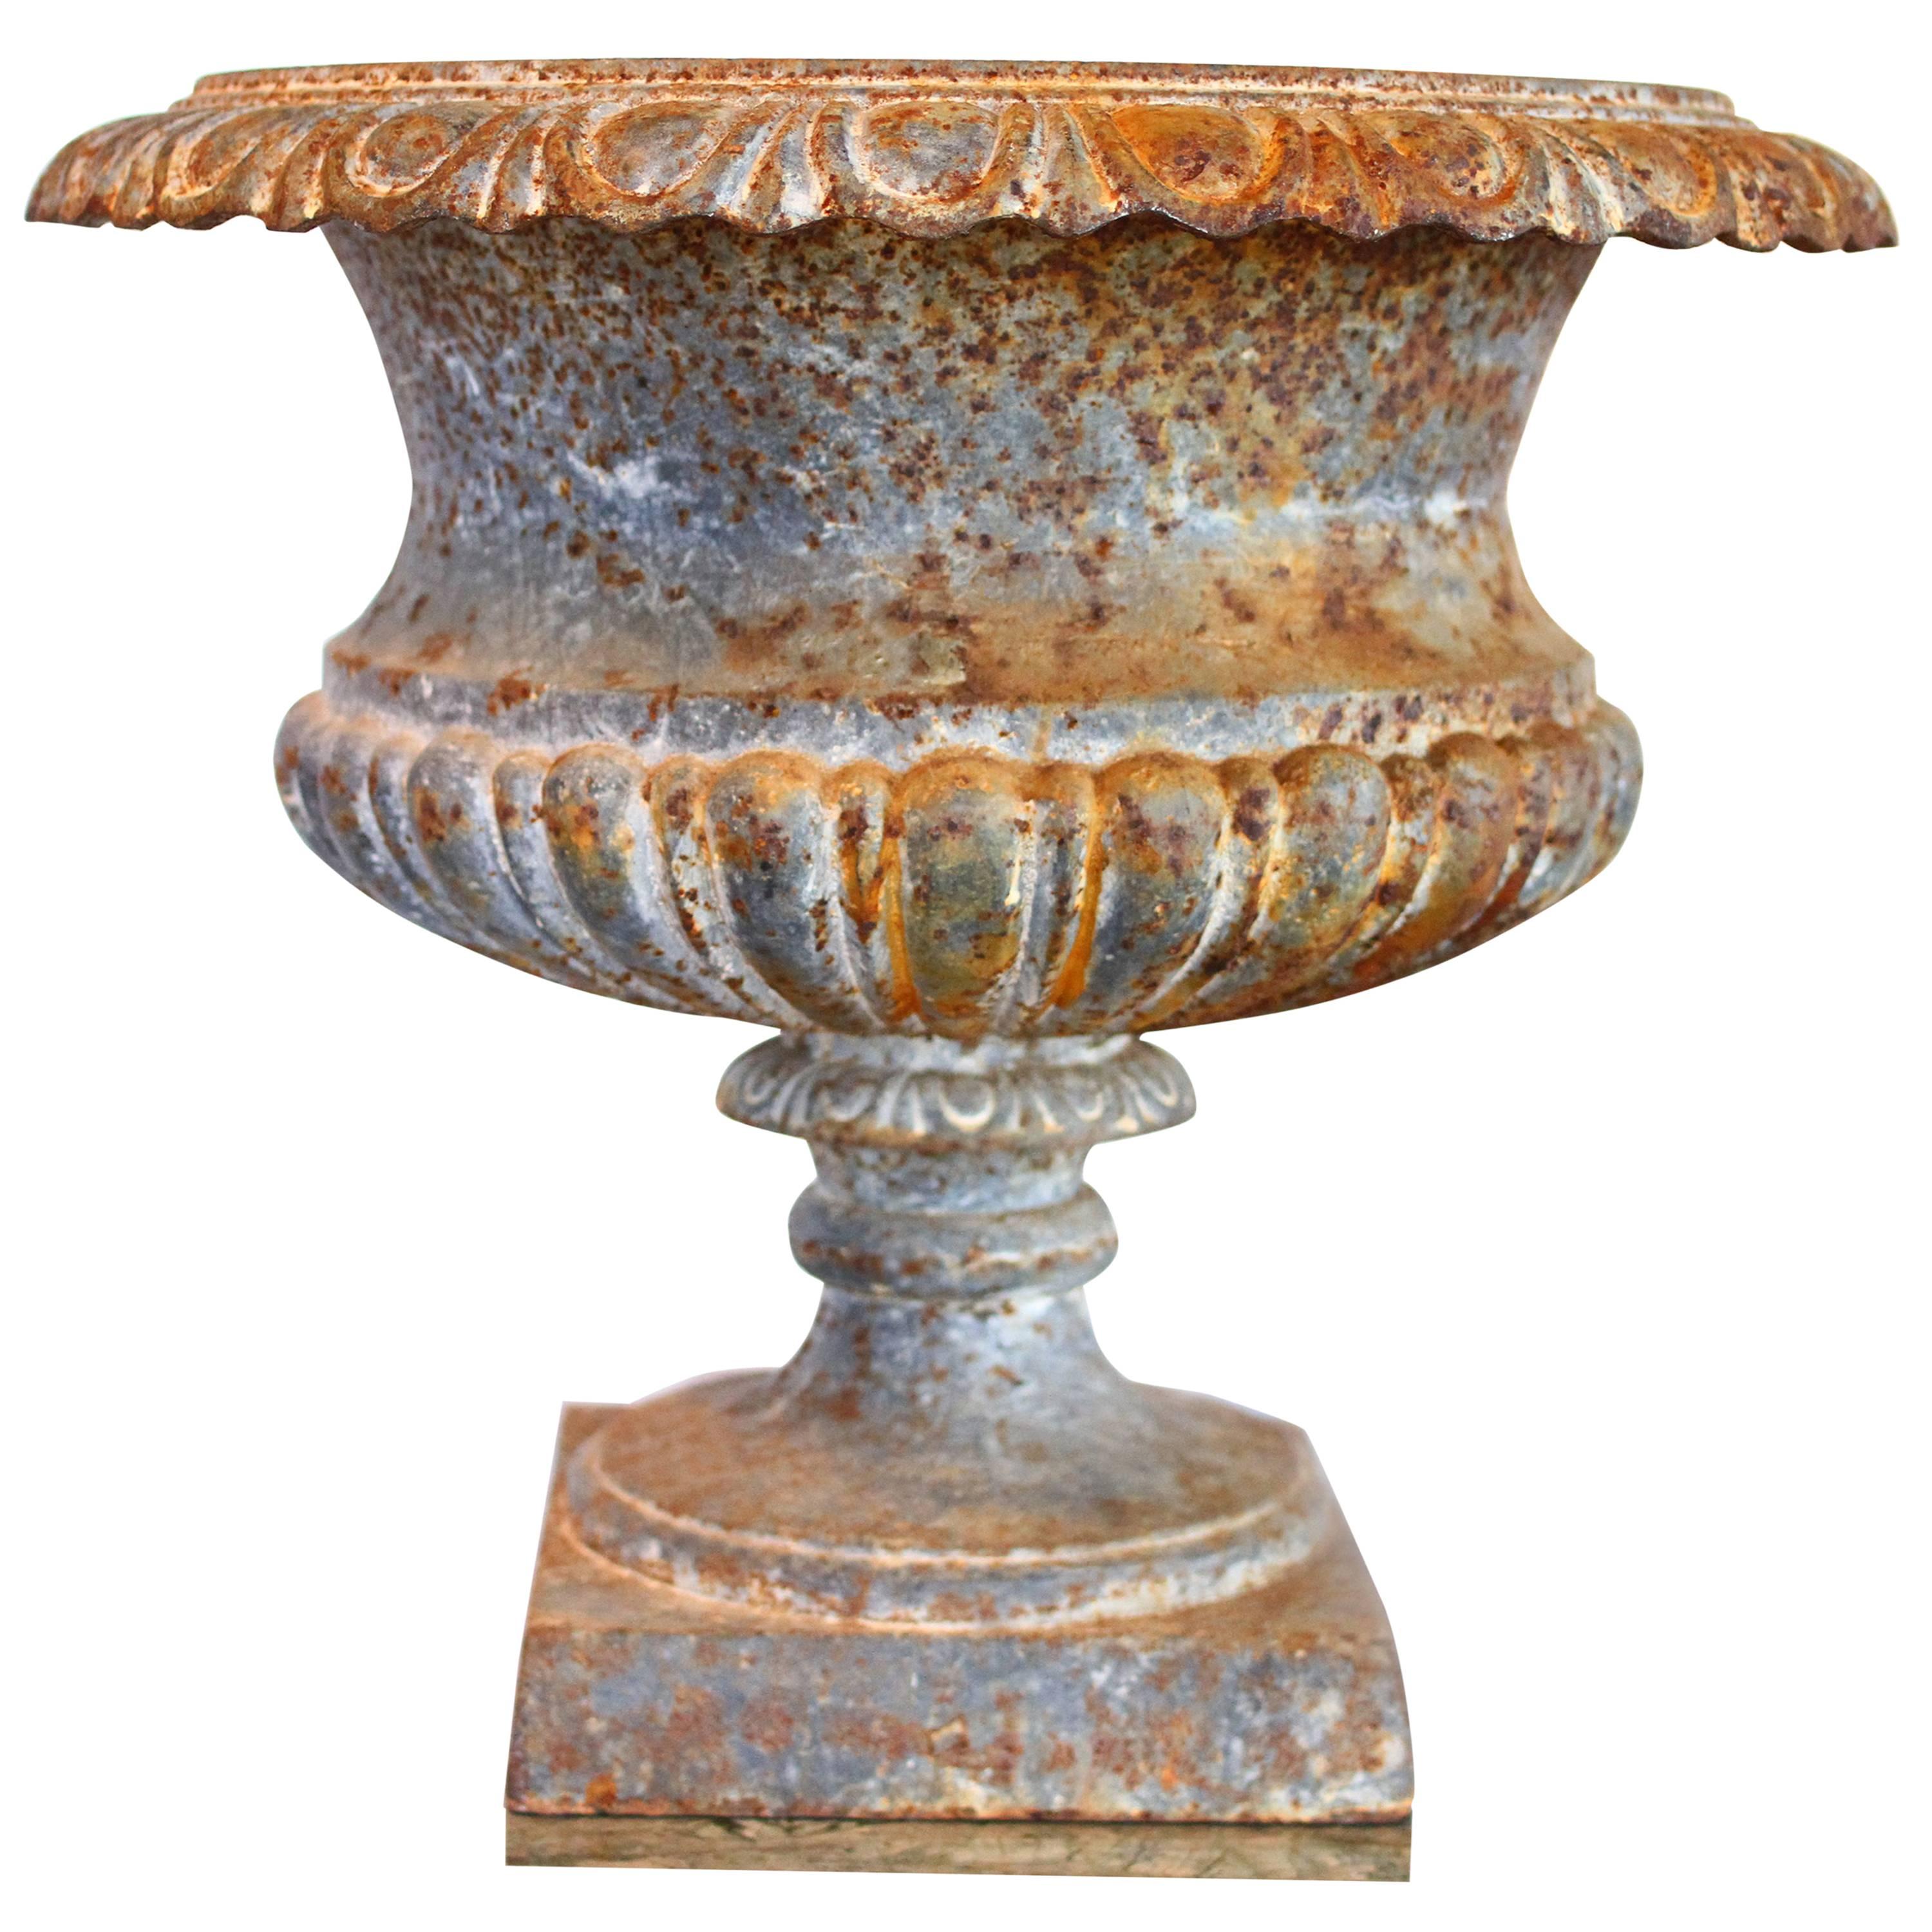 Gorgeous 19th Century French Cast Iron Garden Urn with Egg and Dart Rim